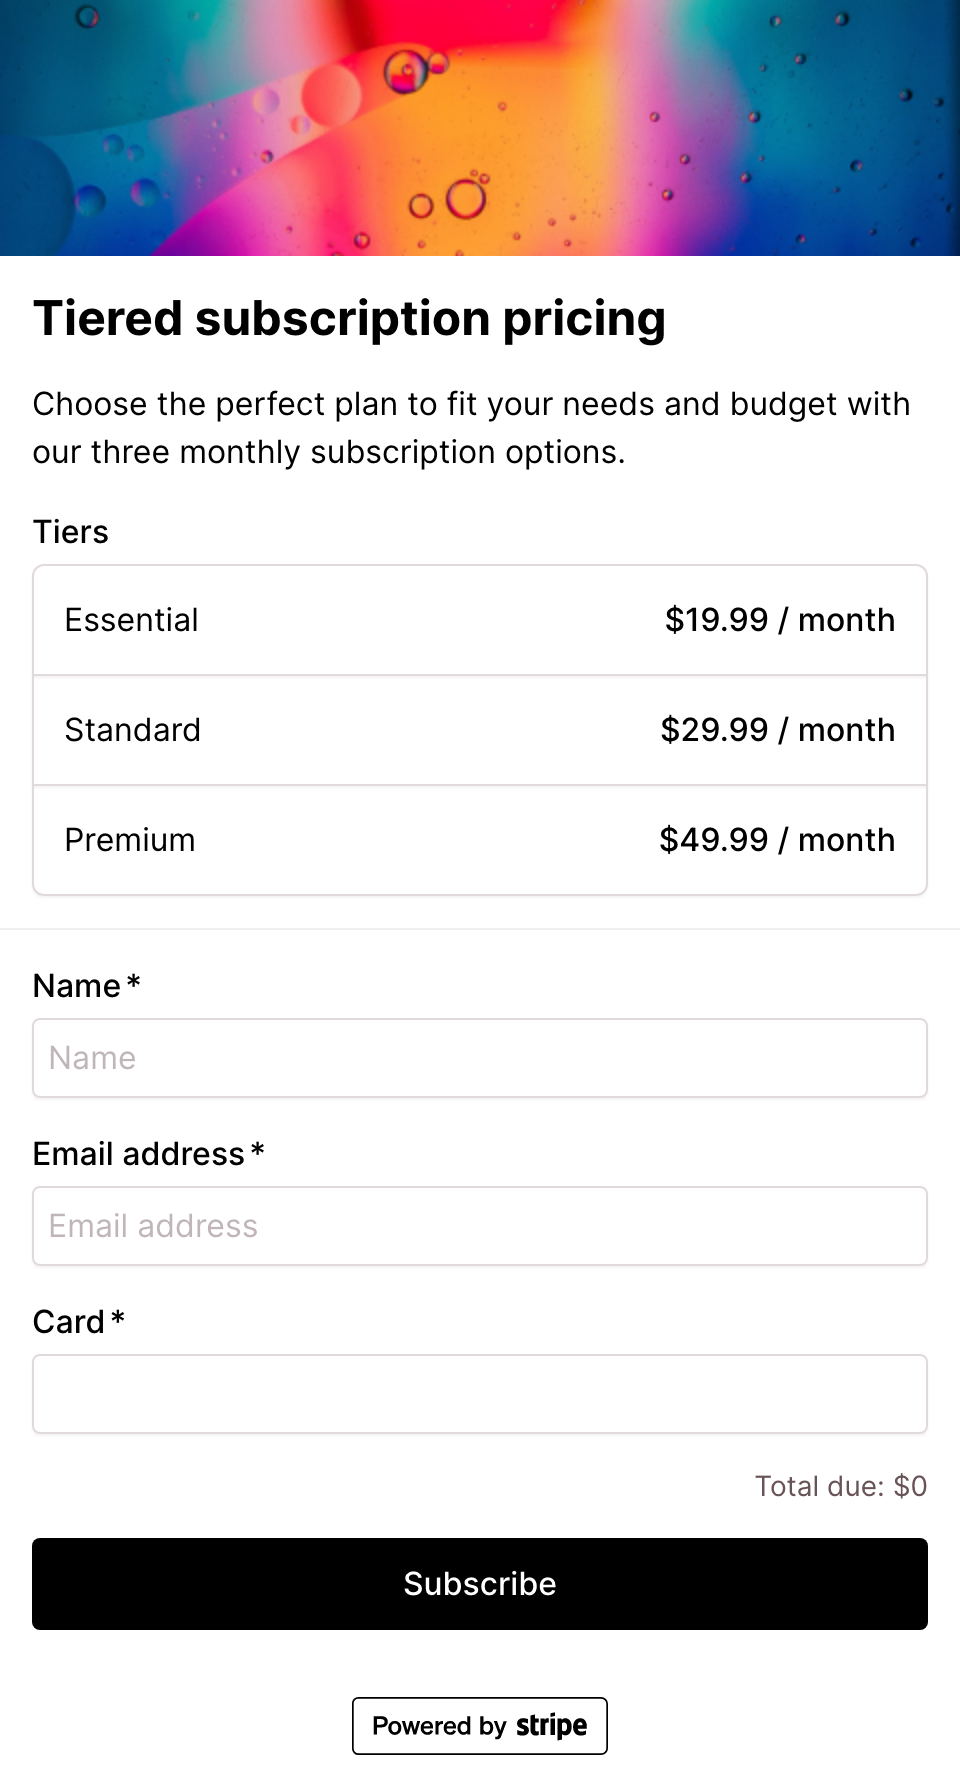 Tiered pricing model - Stripe subscription